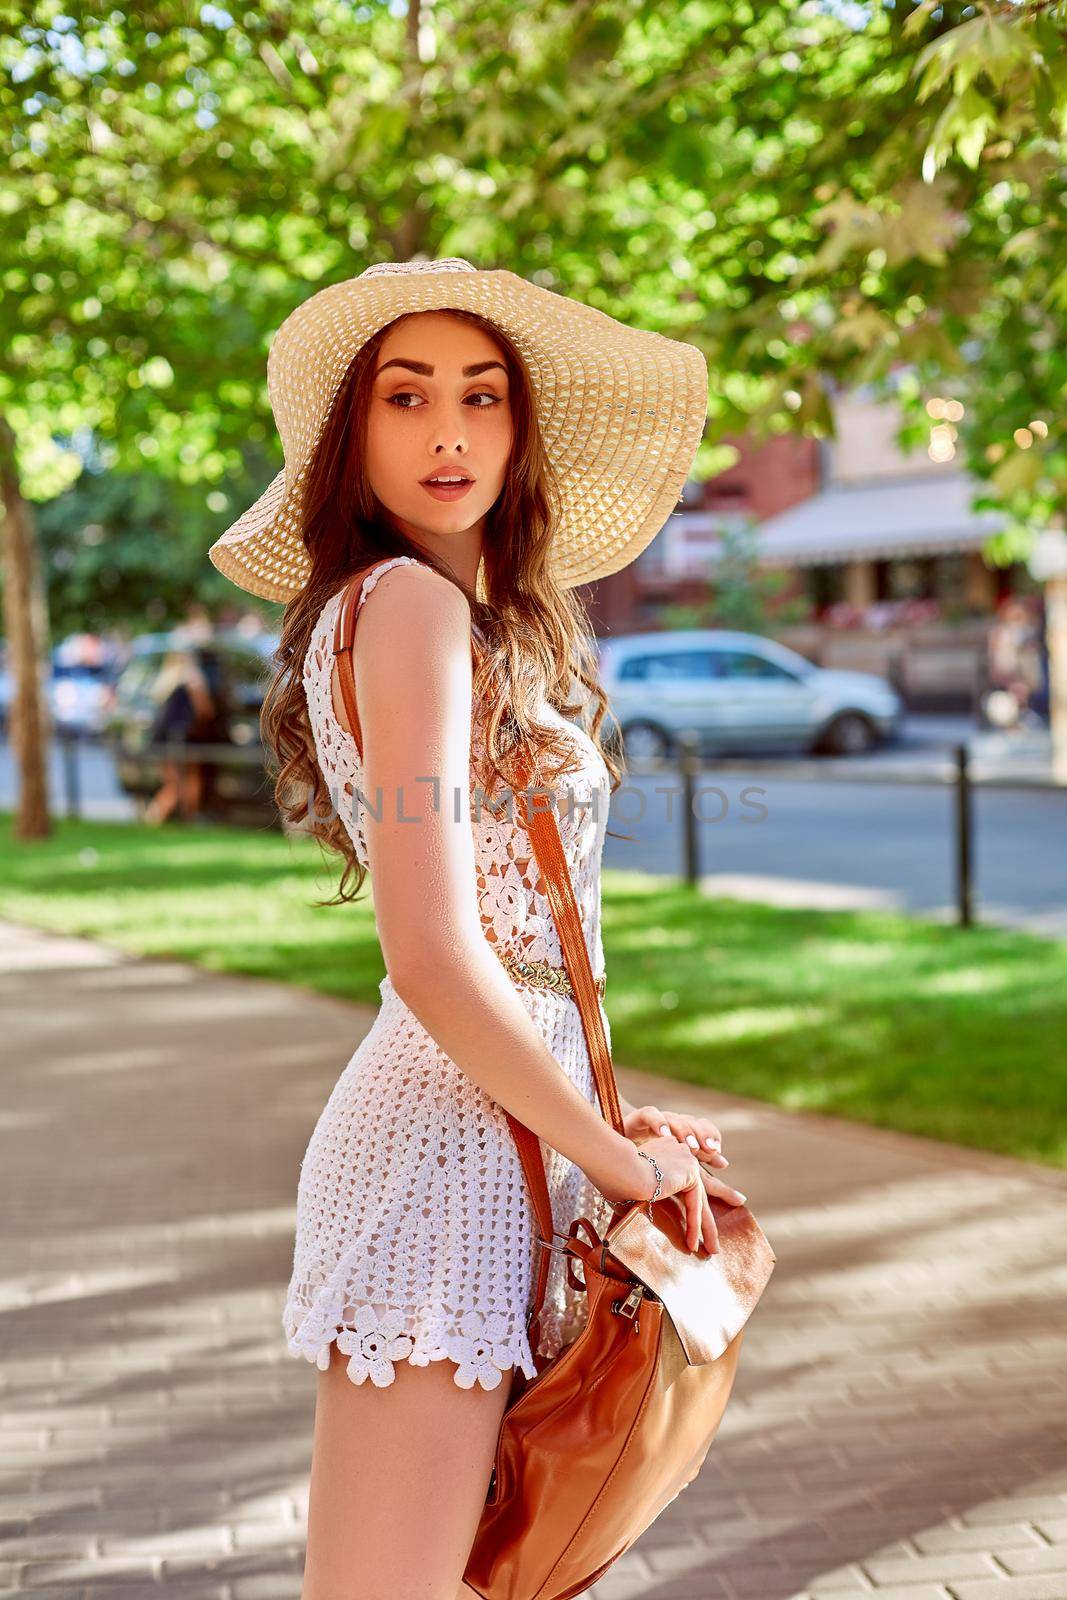 Sunny lifestyle fashion portrait of young stylish hipster woman walking on the street, wearing trendy outfit, straw hat, travel with backpack. Street style